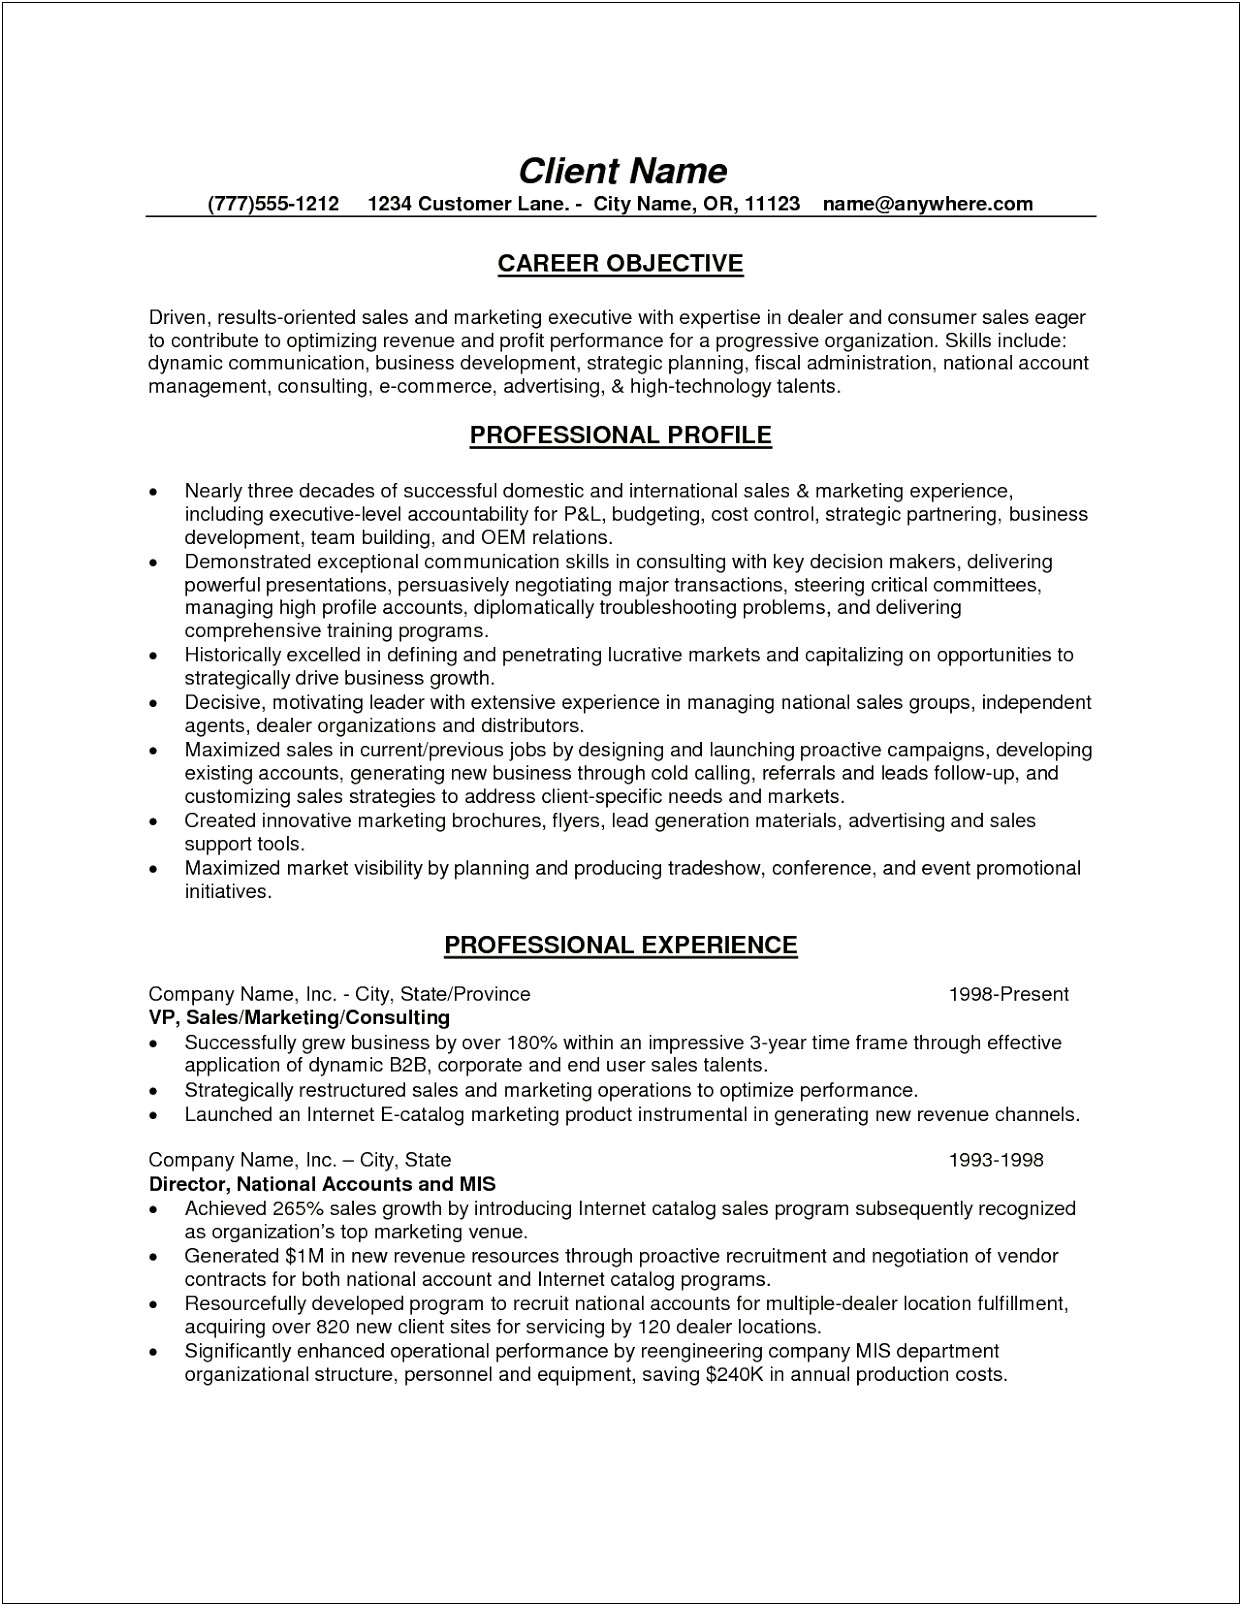 Writing Career Objective On Resume